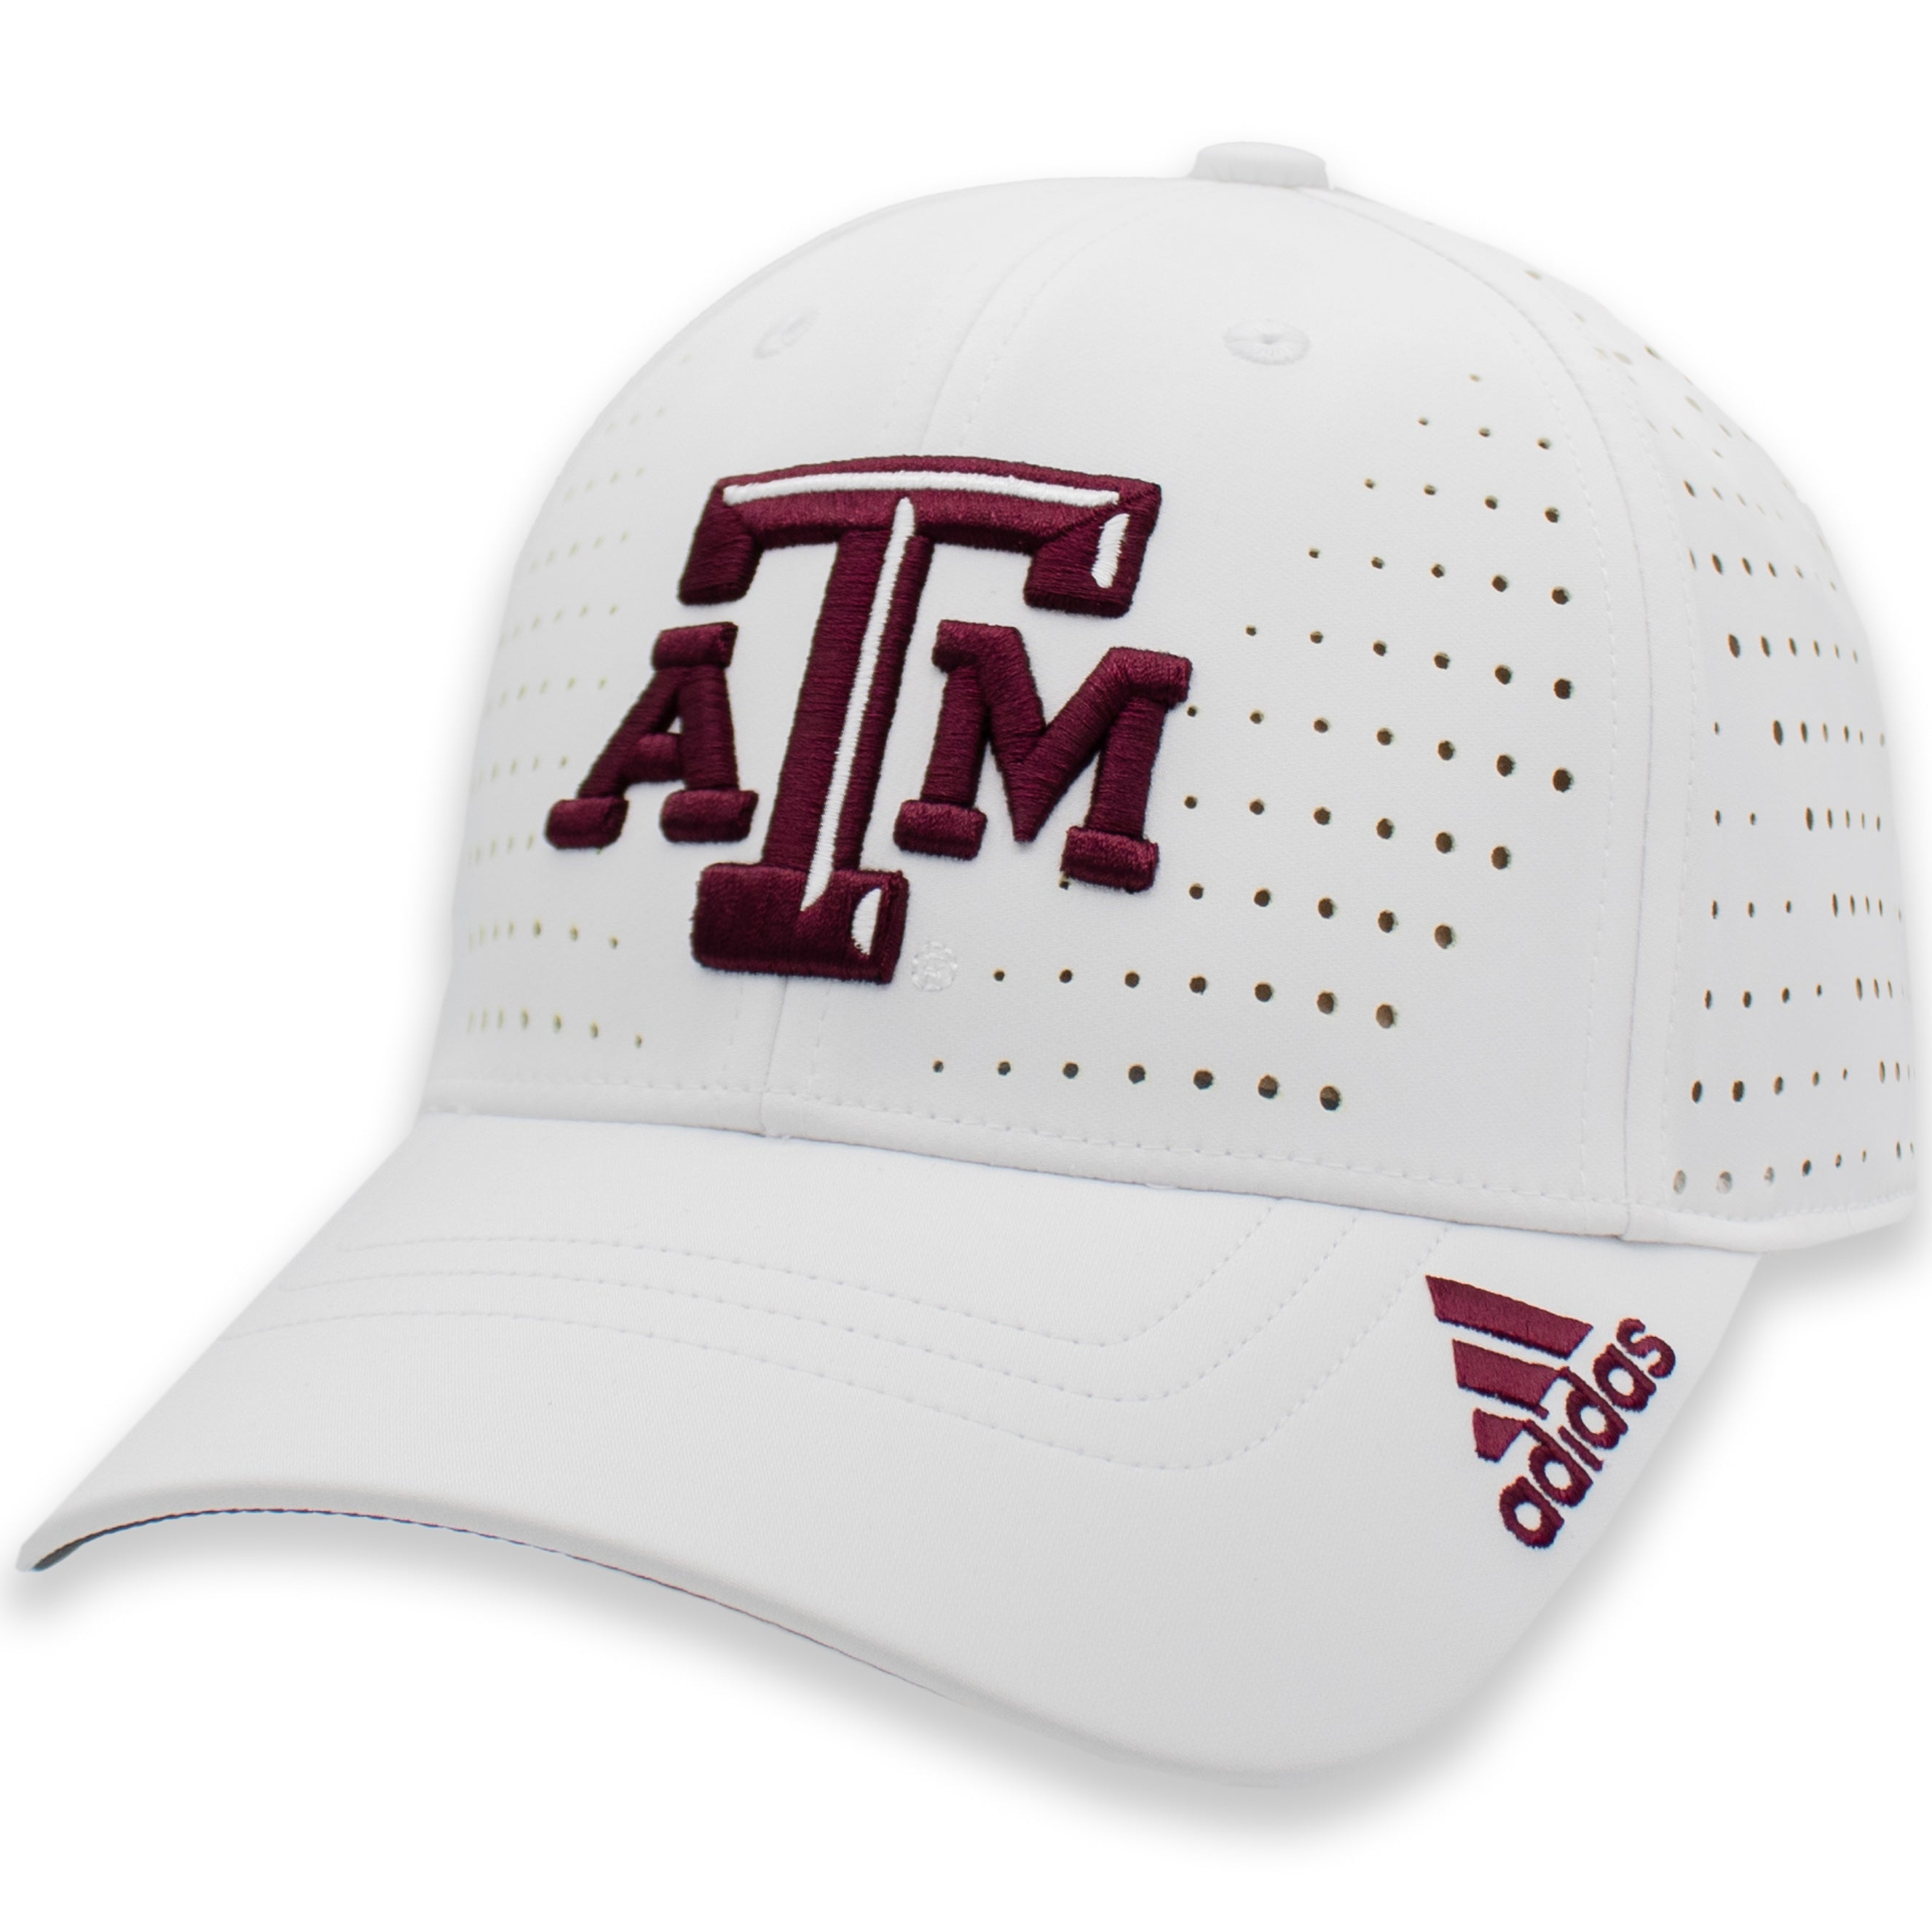 Texas A&M Adidas Structured Adjustable Laser Perf